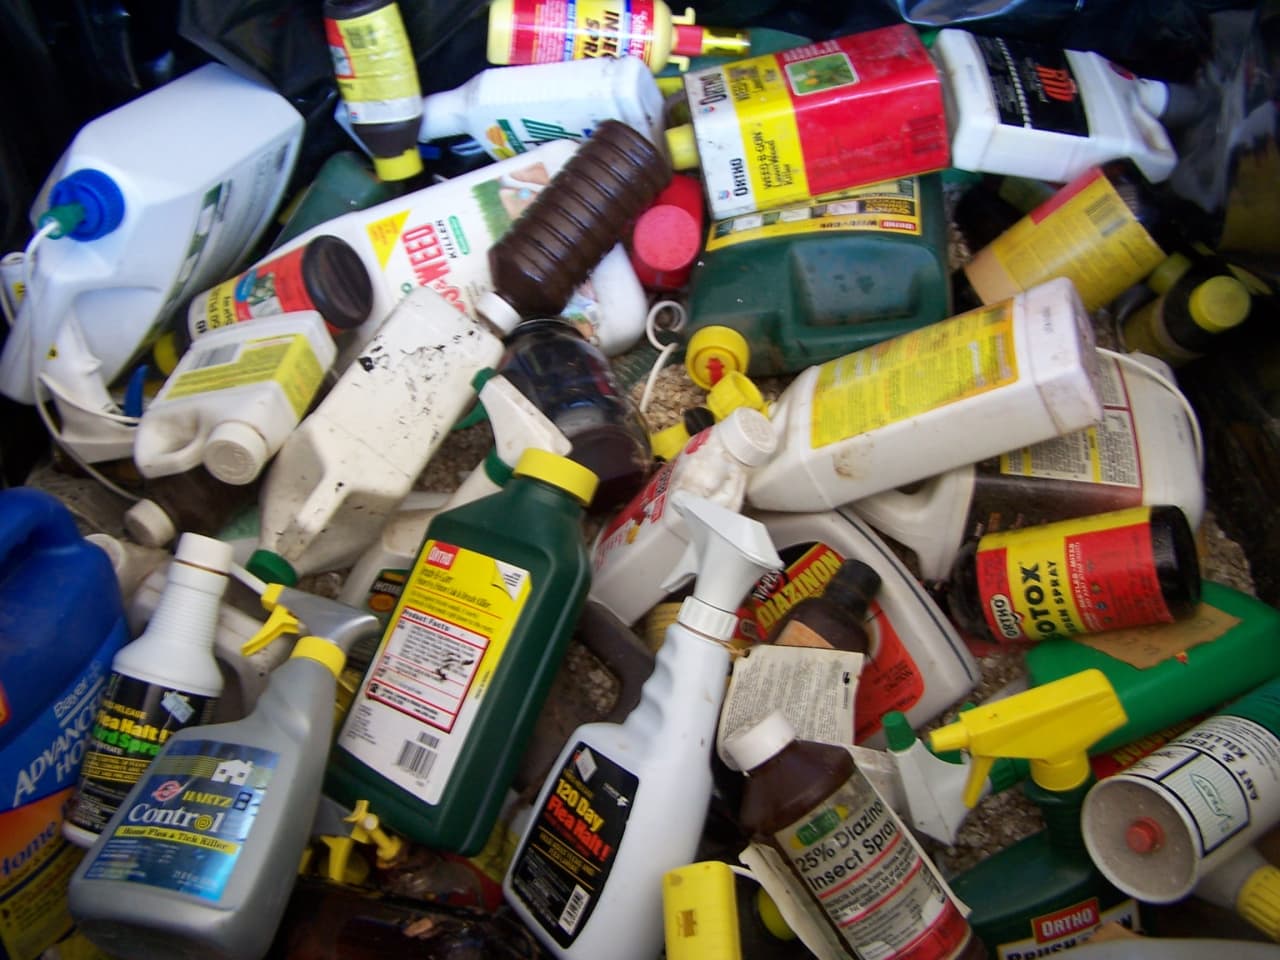 Household Hazardous Waste Day runs from 8 a.m. to 2 p.m. at The Wastewater Plant at 394 Main Street, New Canaan.